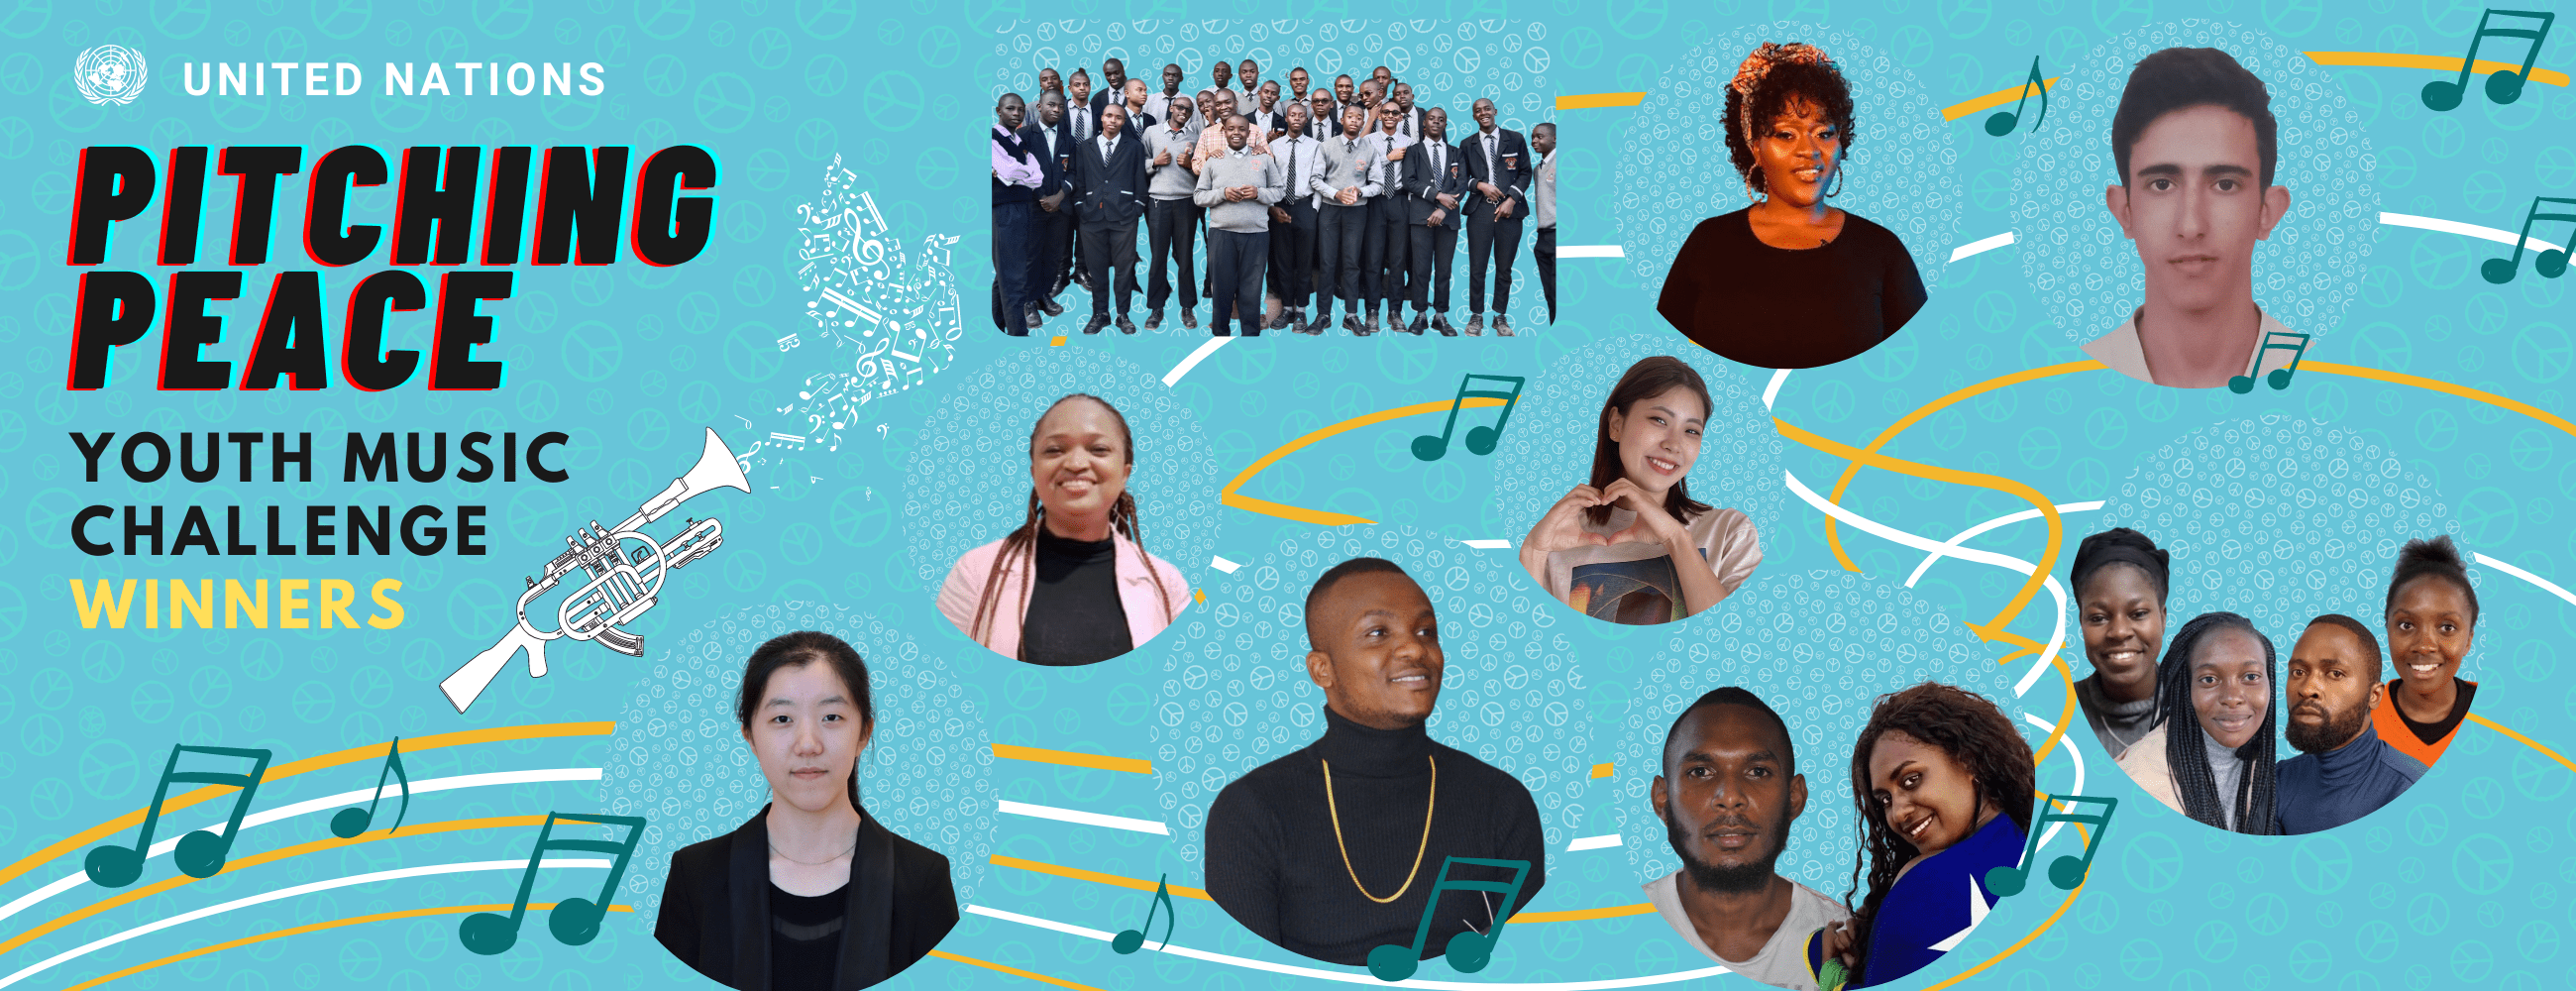 Winners of the Pitching Peace Youth Music Challenge Announced